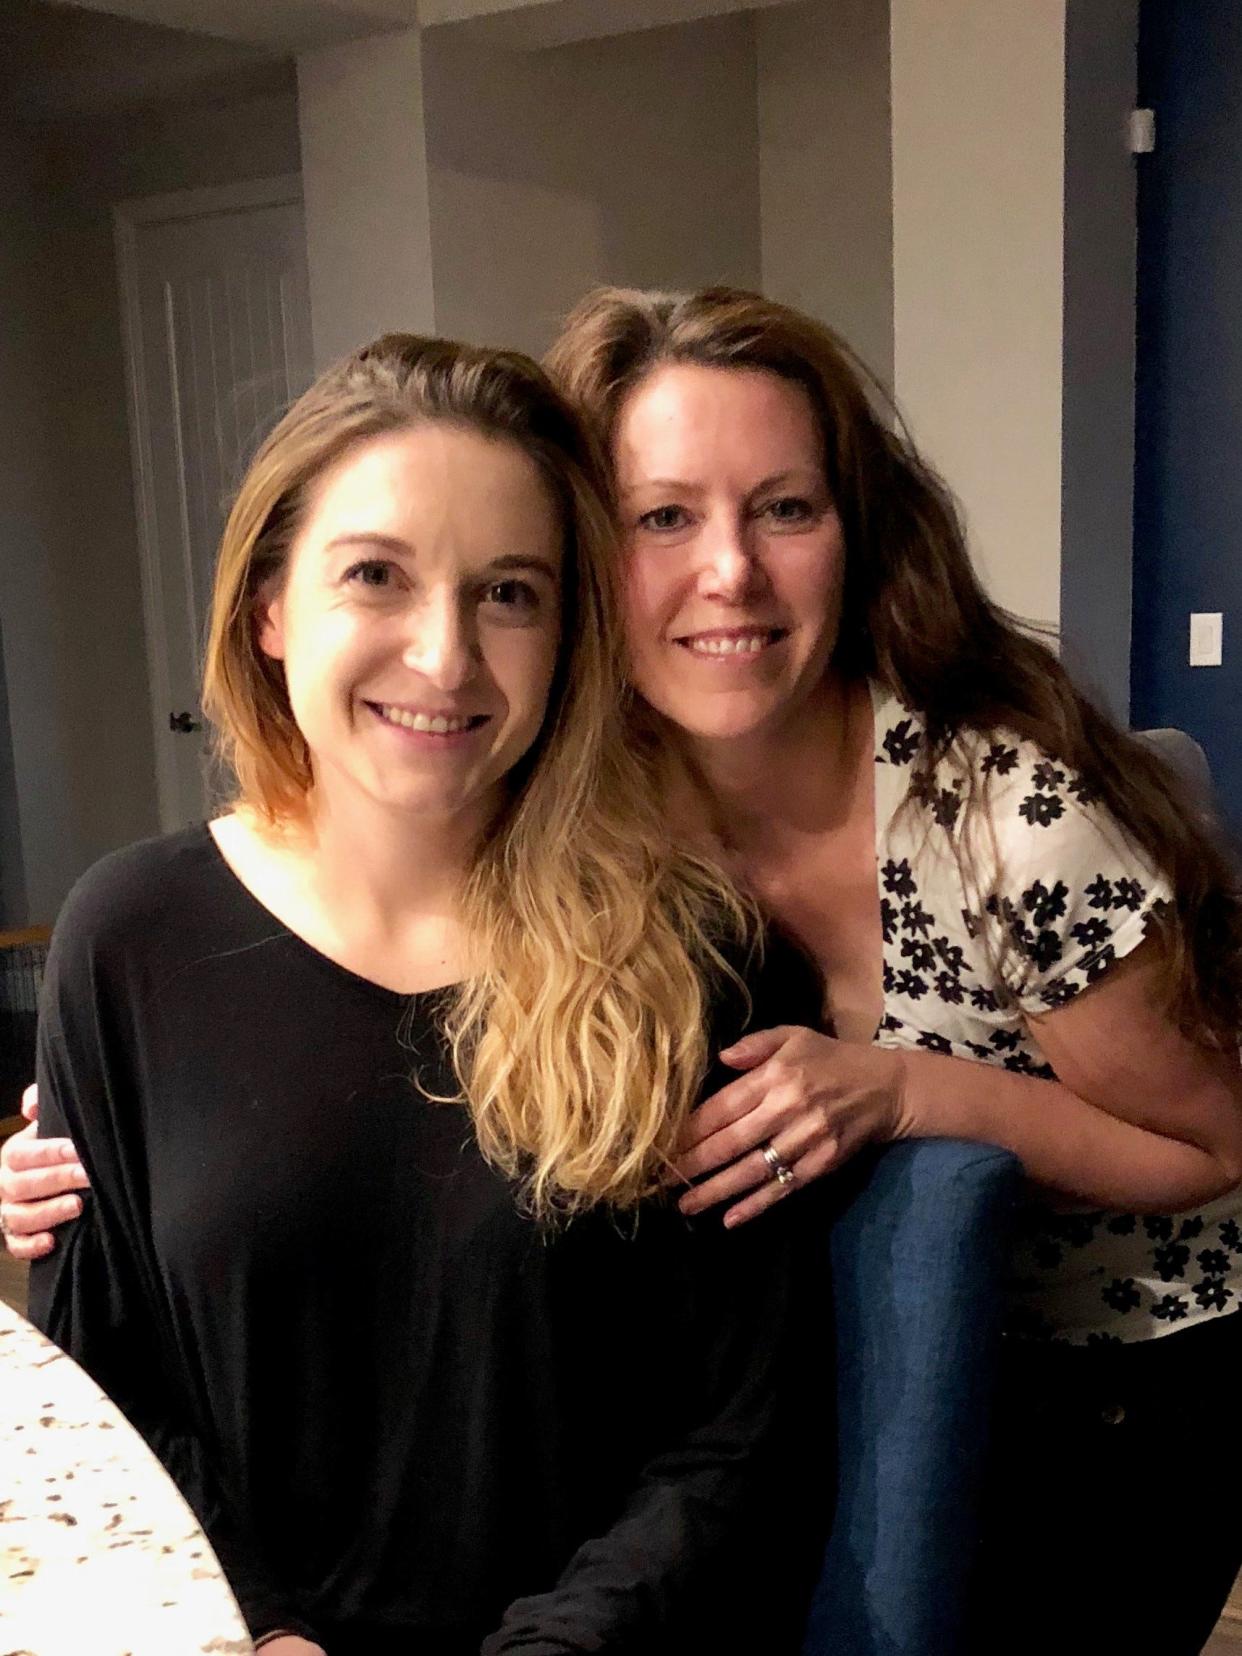 Allison Bailey, left, and her mother Felicia Cavanaugh pose for a photo in November 2018.